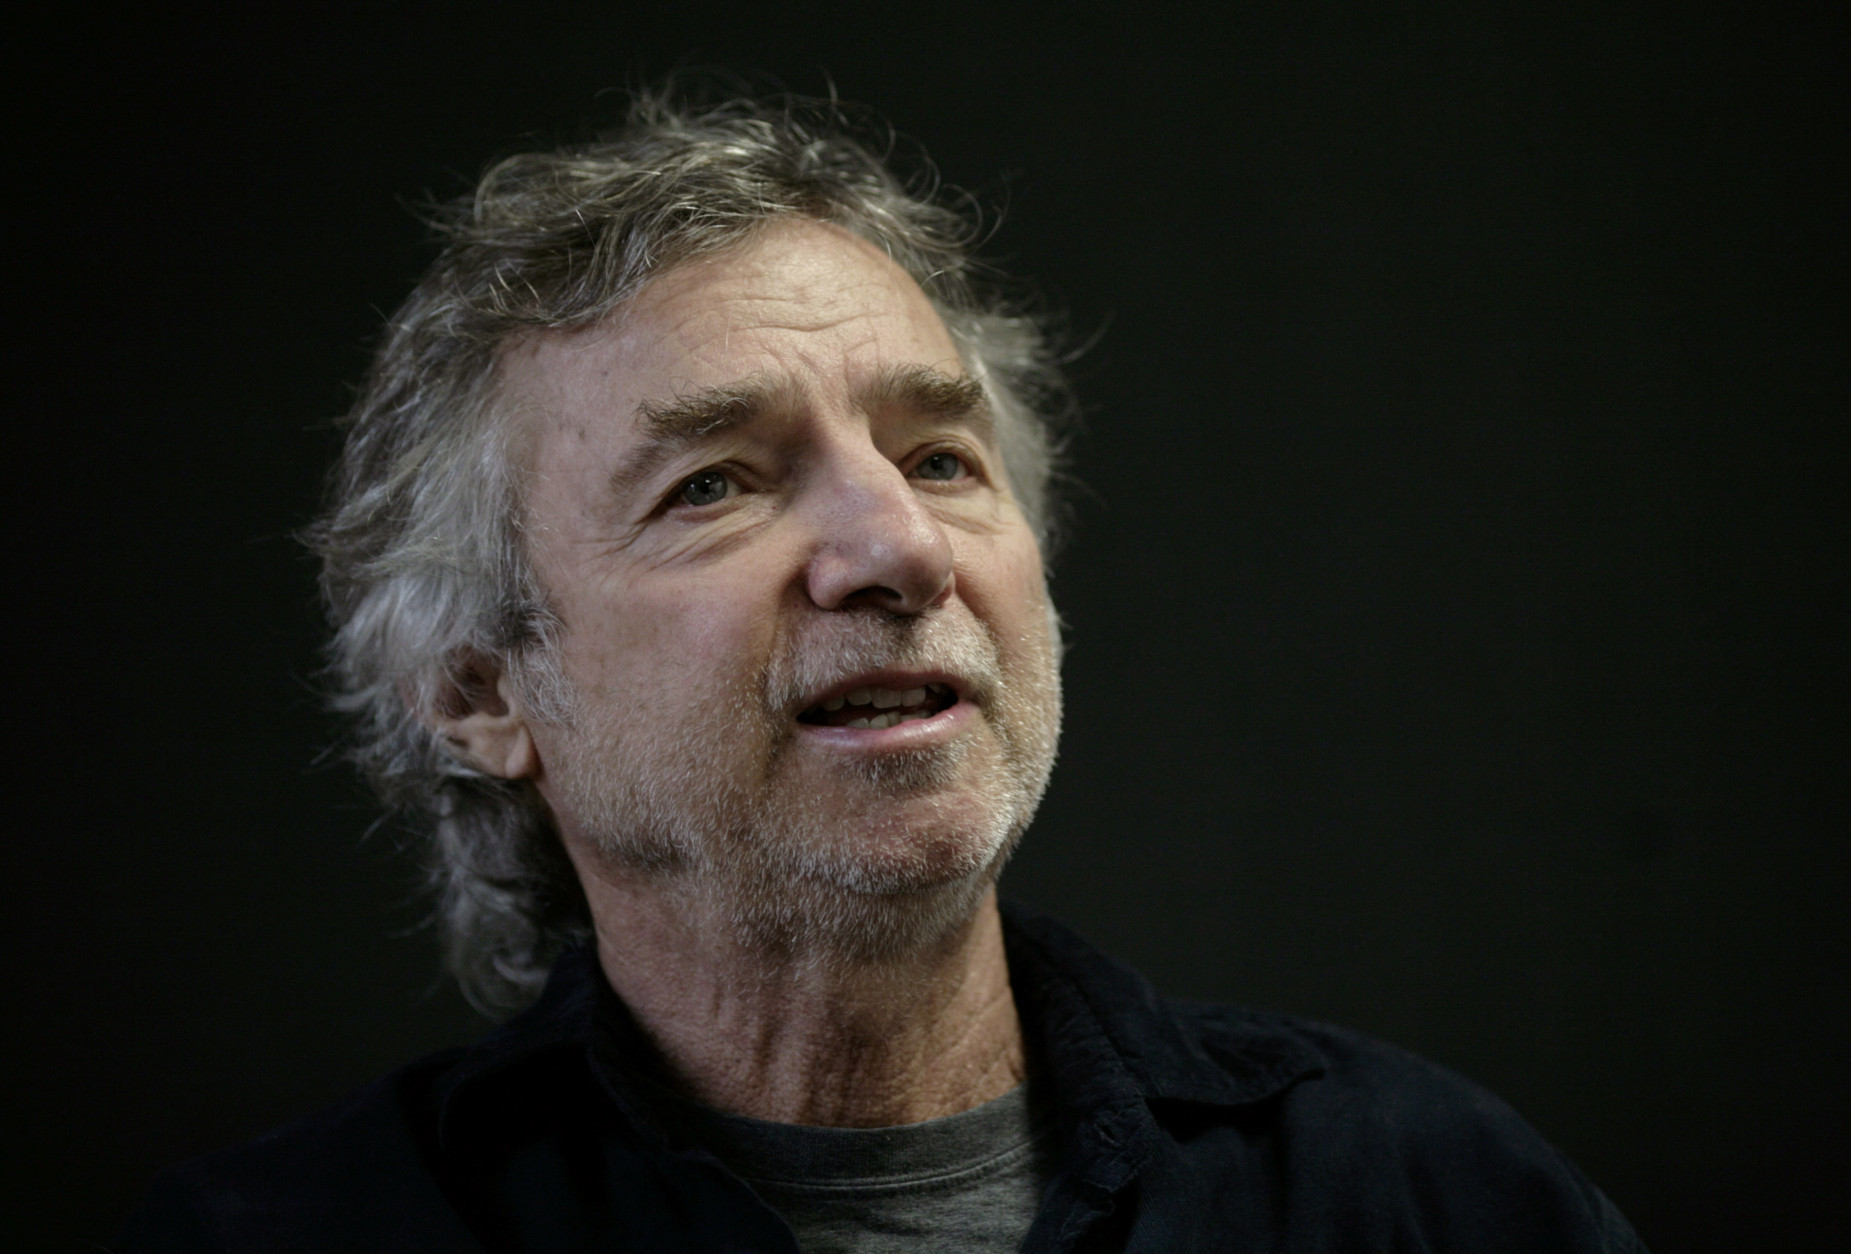 FILE - In this Dec. 1, 2009 file photo, U.S. filmmaker Curtis Hanson, speaks during an interview at the International Book Fair in Guadalajara, Mexico. Hanson, who won an Oscar for the screenplay for L.A. Confidential and directed Eminem in the movie 8 Mile, has died. Los Angeles police say paramedics called to Hansons Hollywood Hills home found him dead Tuesday, Sept. 20, 2016. He was 71. (AP Photo/Carlos Jasso, File)